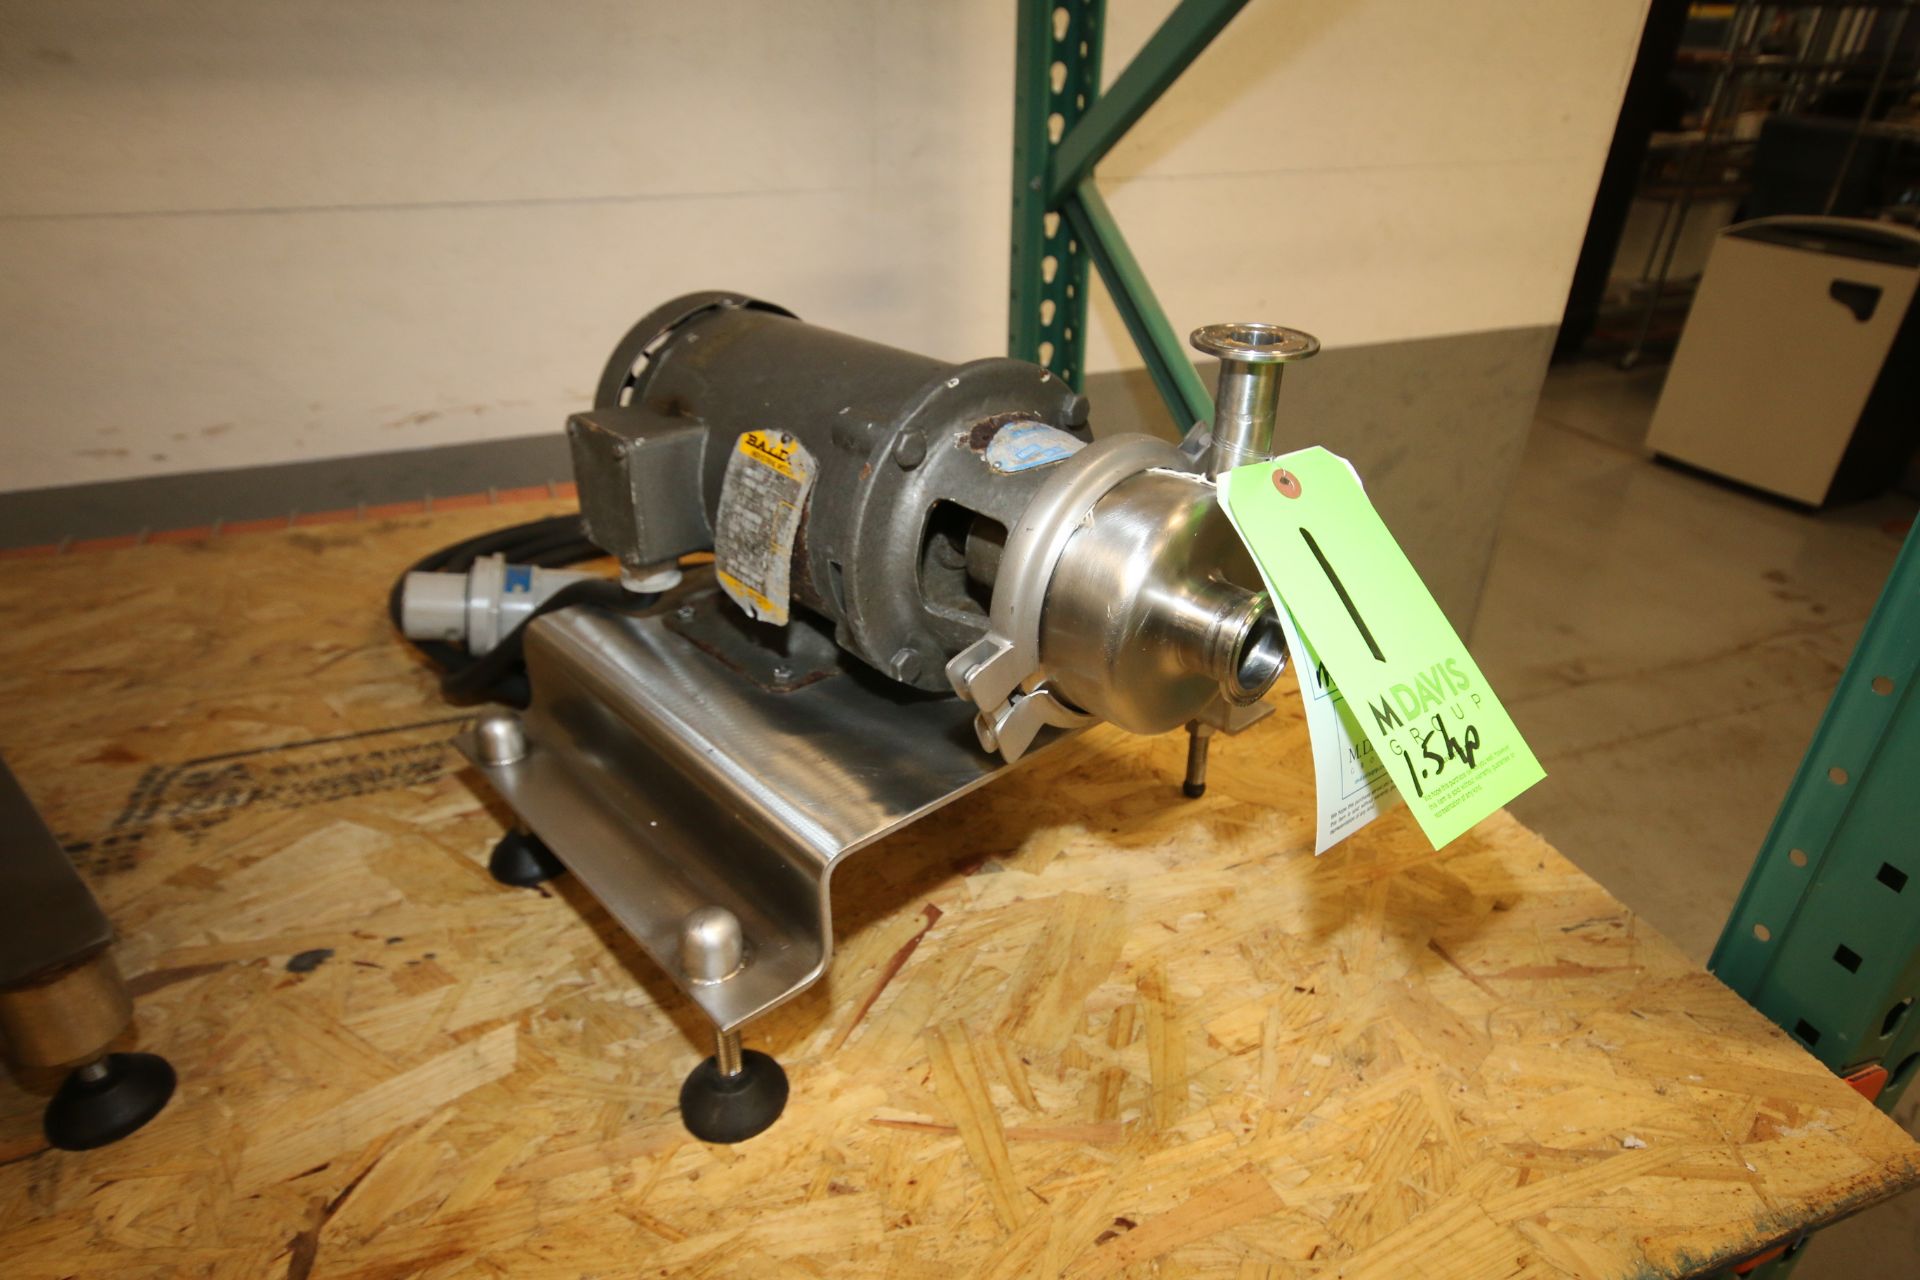 Thomsen 1.5 hp Centrifugal Pump, Model 42021-GA, S/N 21839 with 1-1/2" x 1" Clamp Type S/S Head